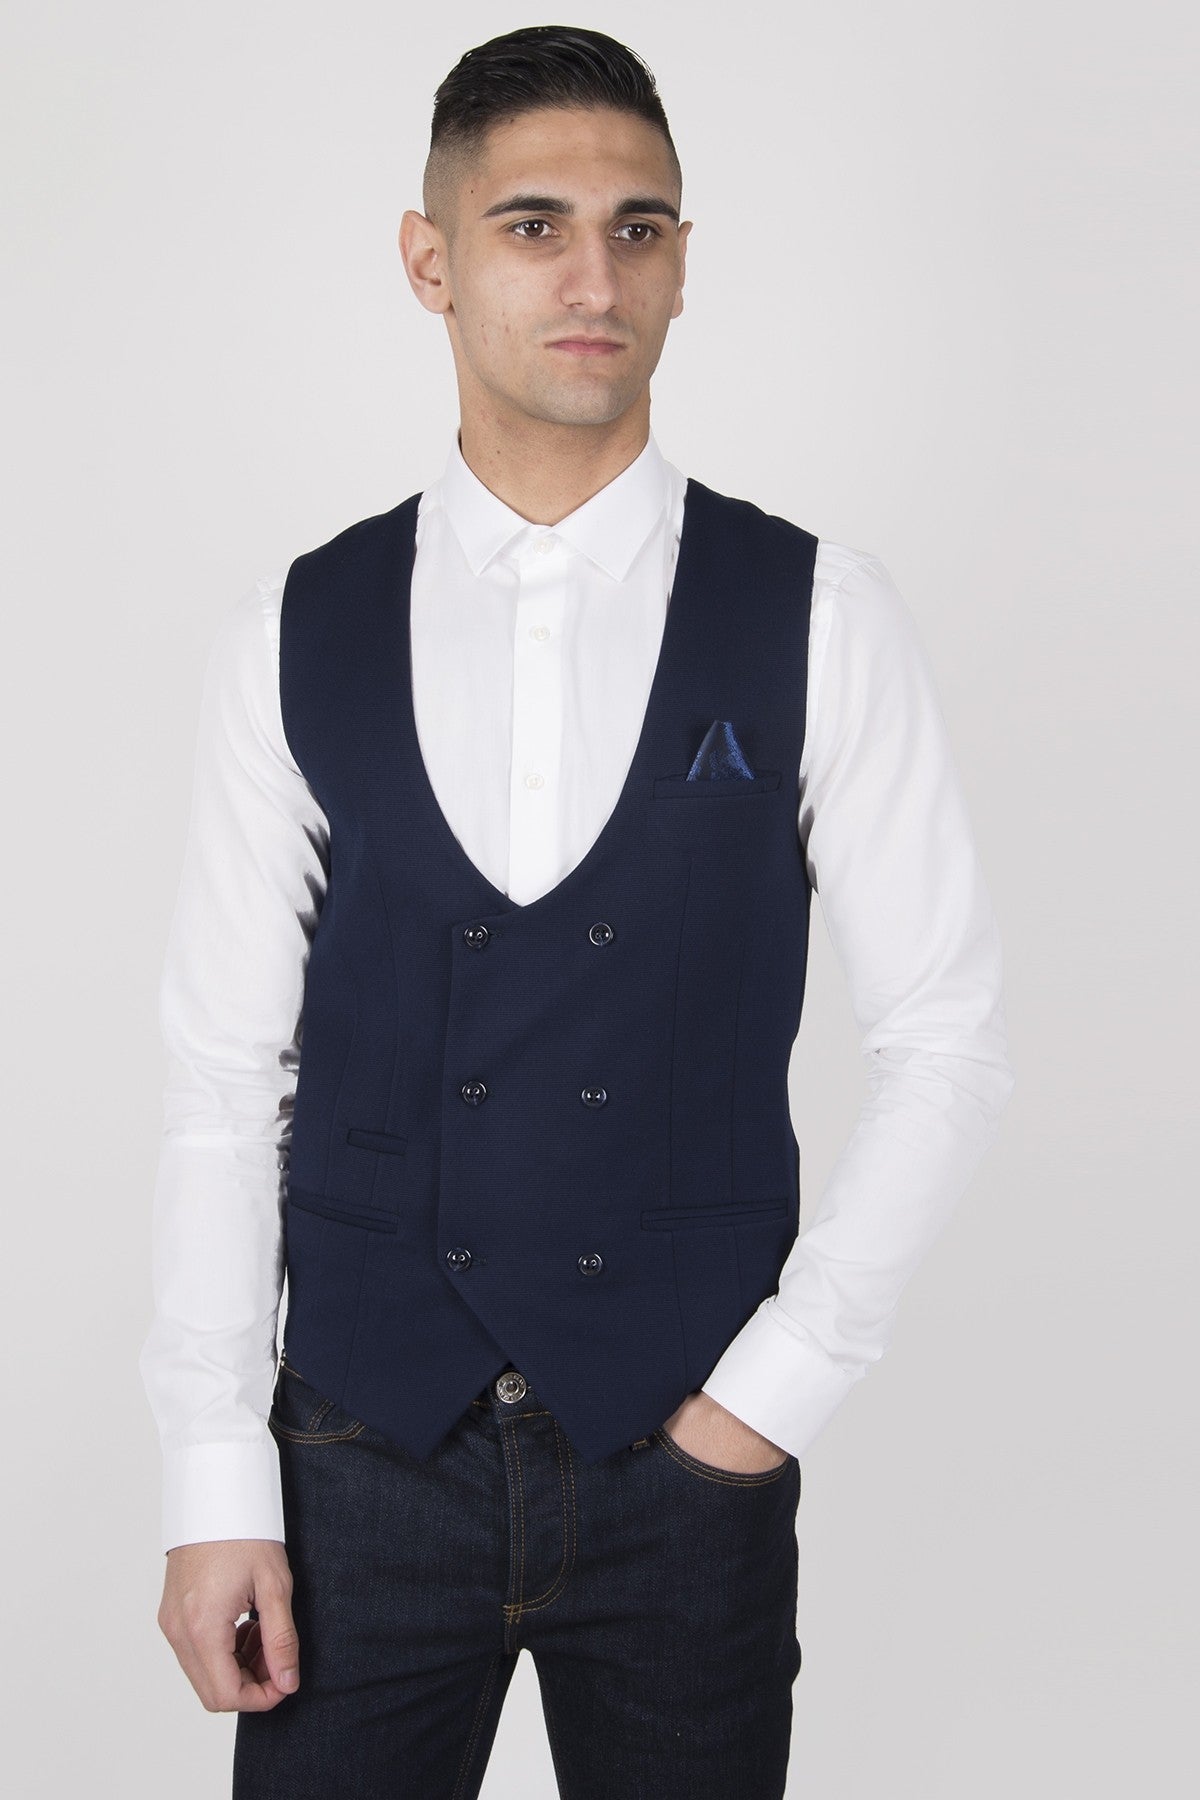 Kelly Double Breasted Waistcoat by Marc Darcy - Spirit Clothing